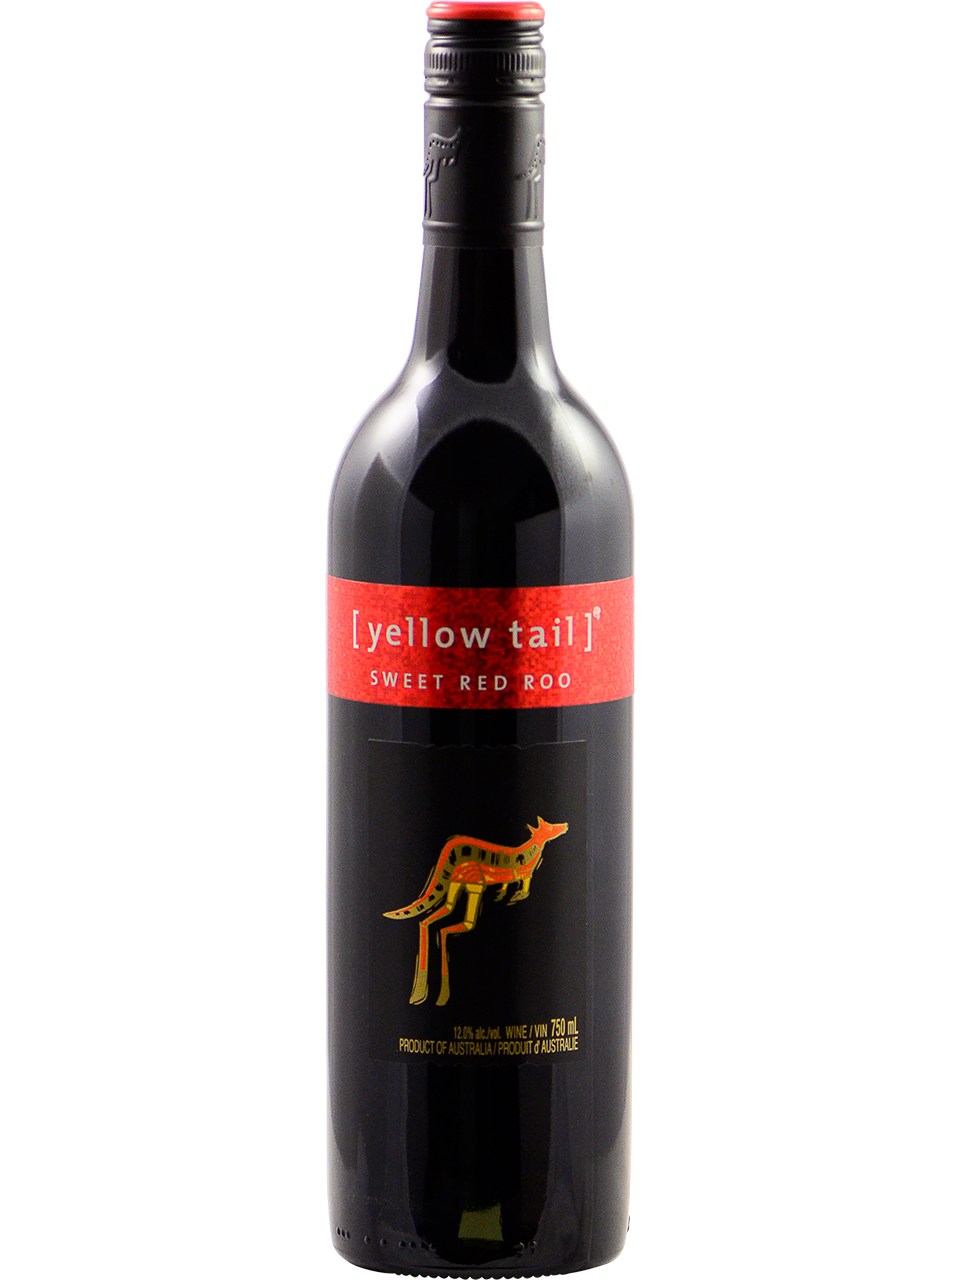 images/wine/Red Wine/Yellow Tail Sweet Red Roo 750ml.jpg